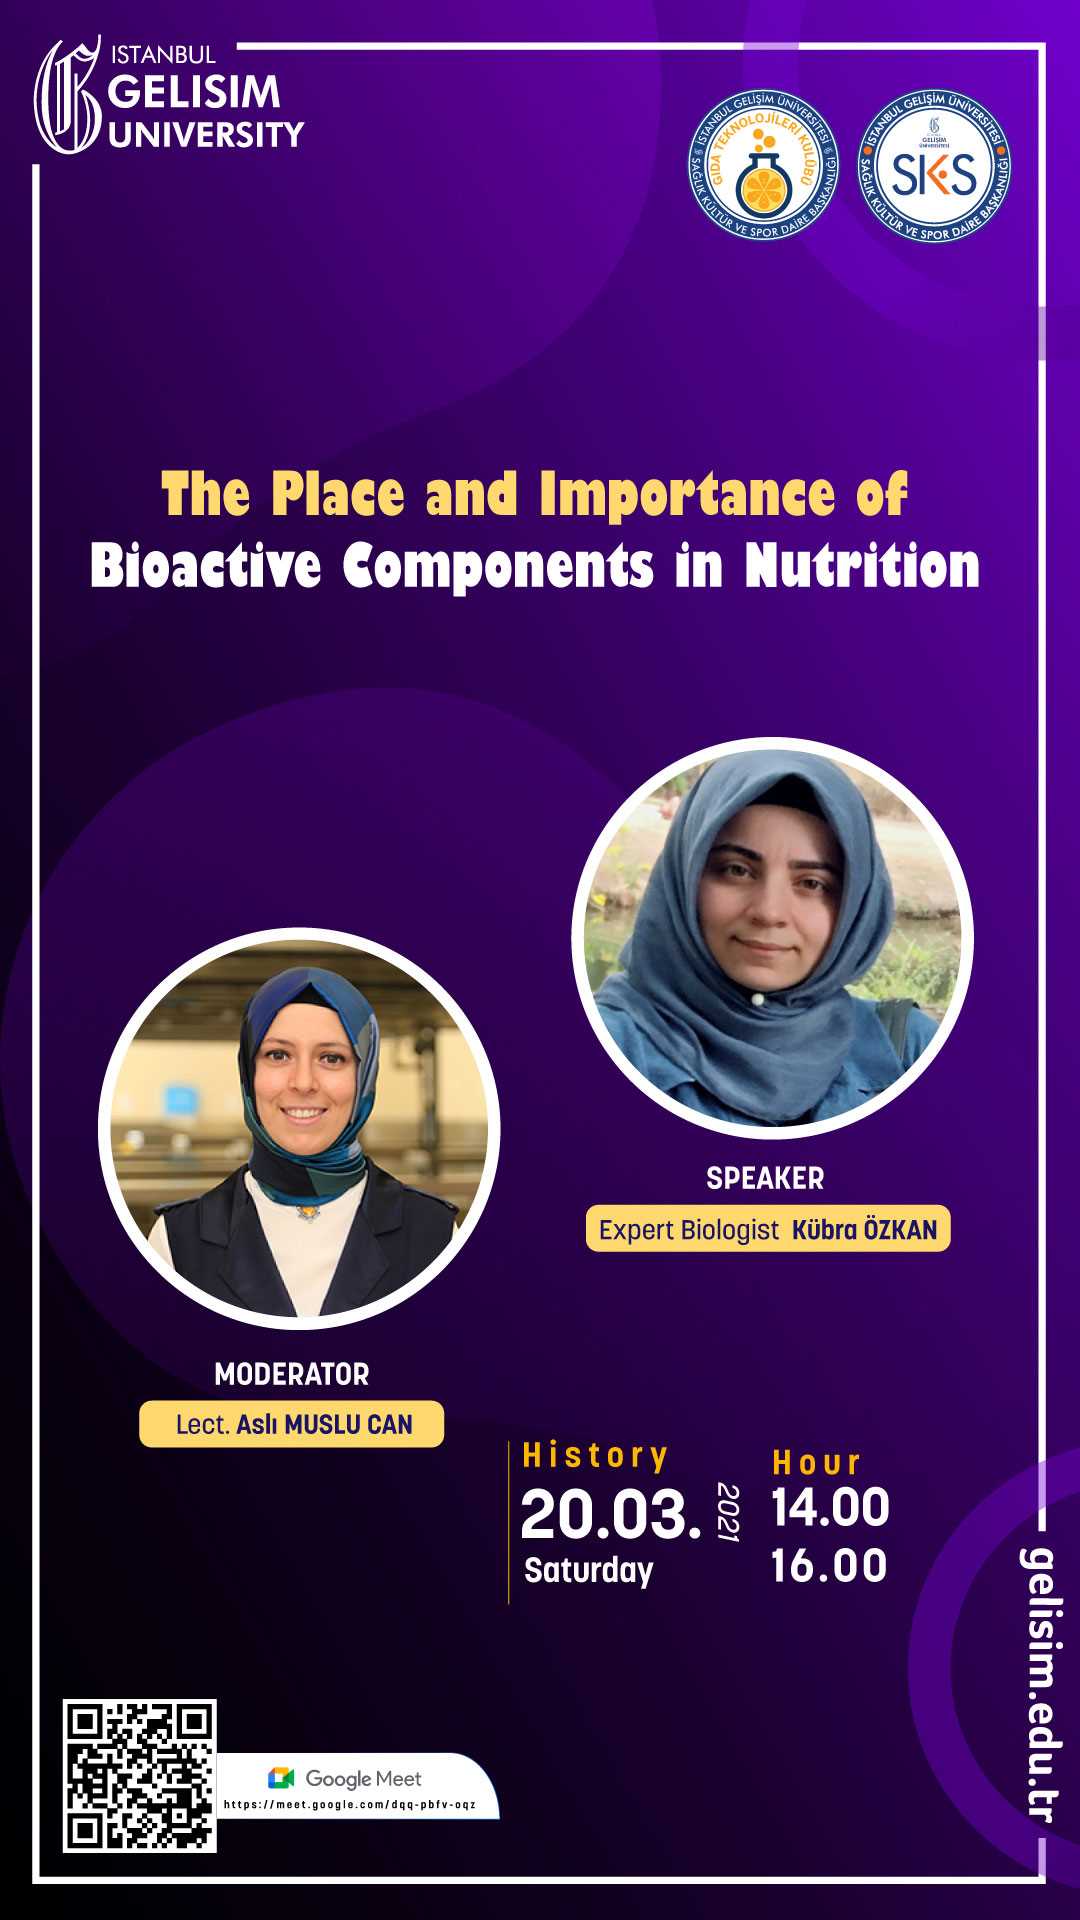 The Place and Importance of Bioactive Components in Nutrition